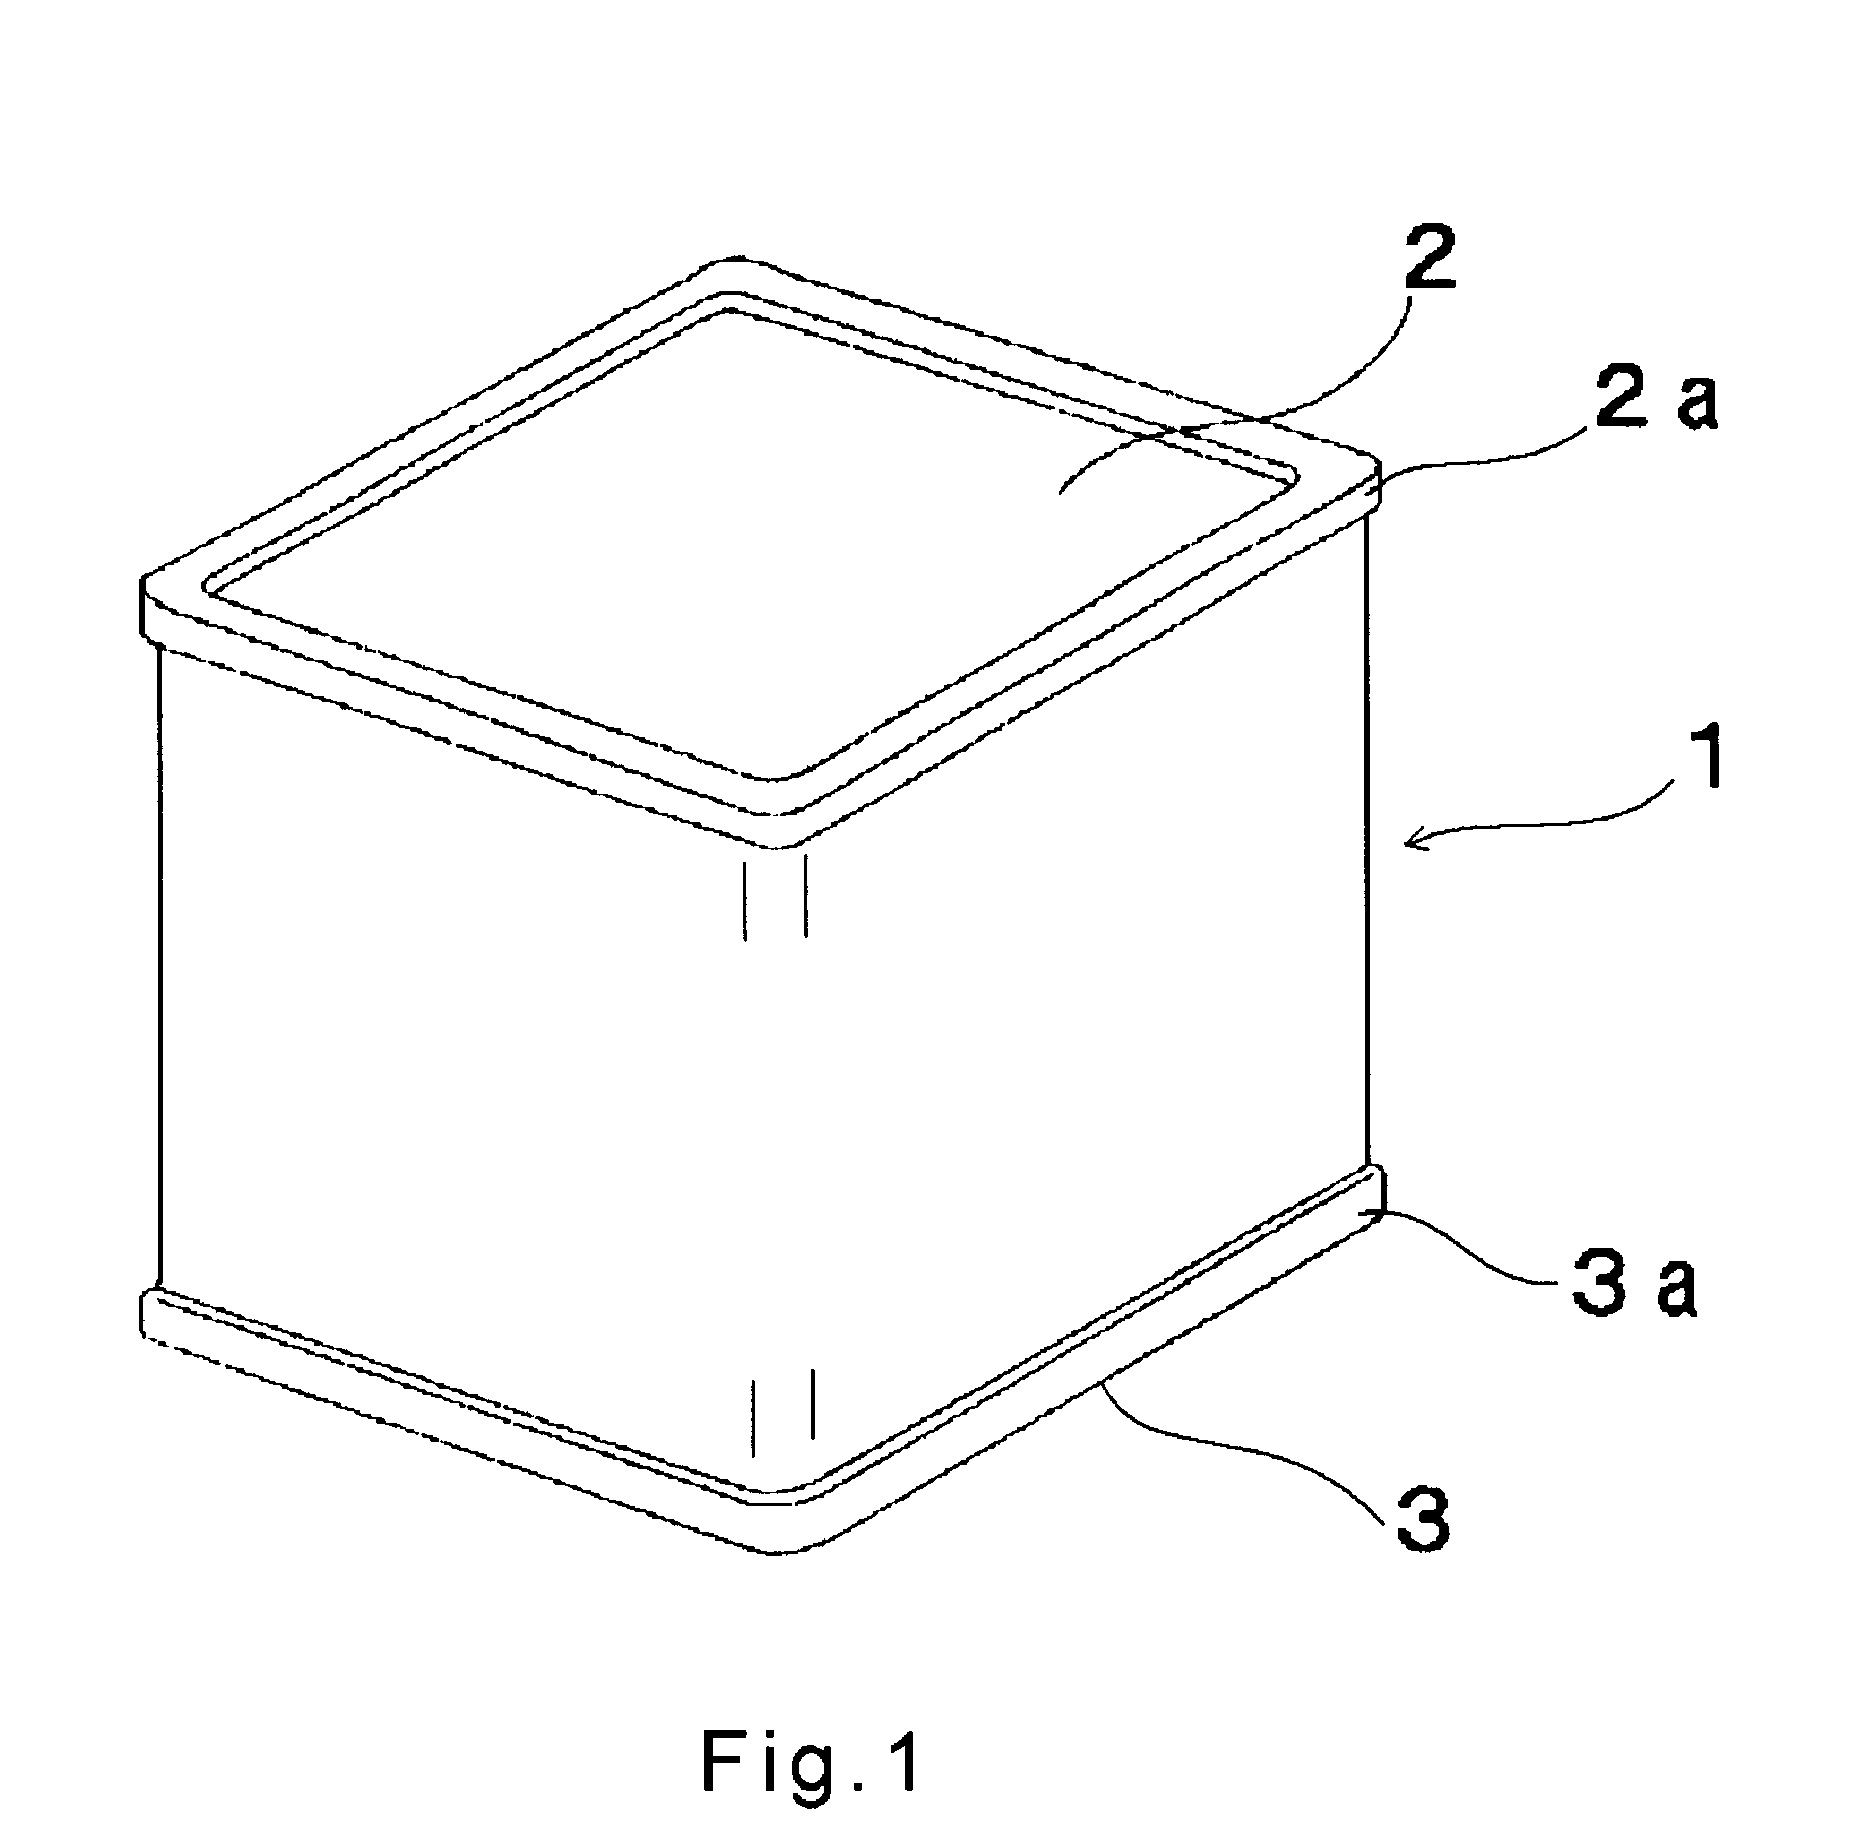 Three-piece square can and method of manufacturing the same